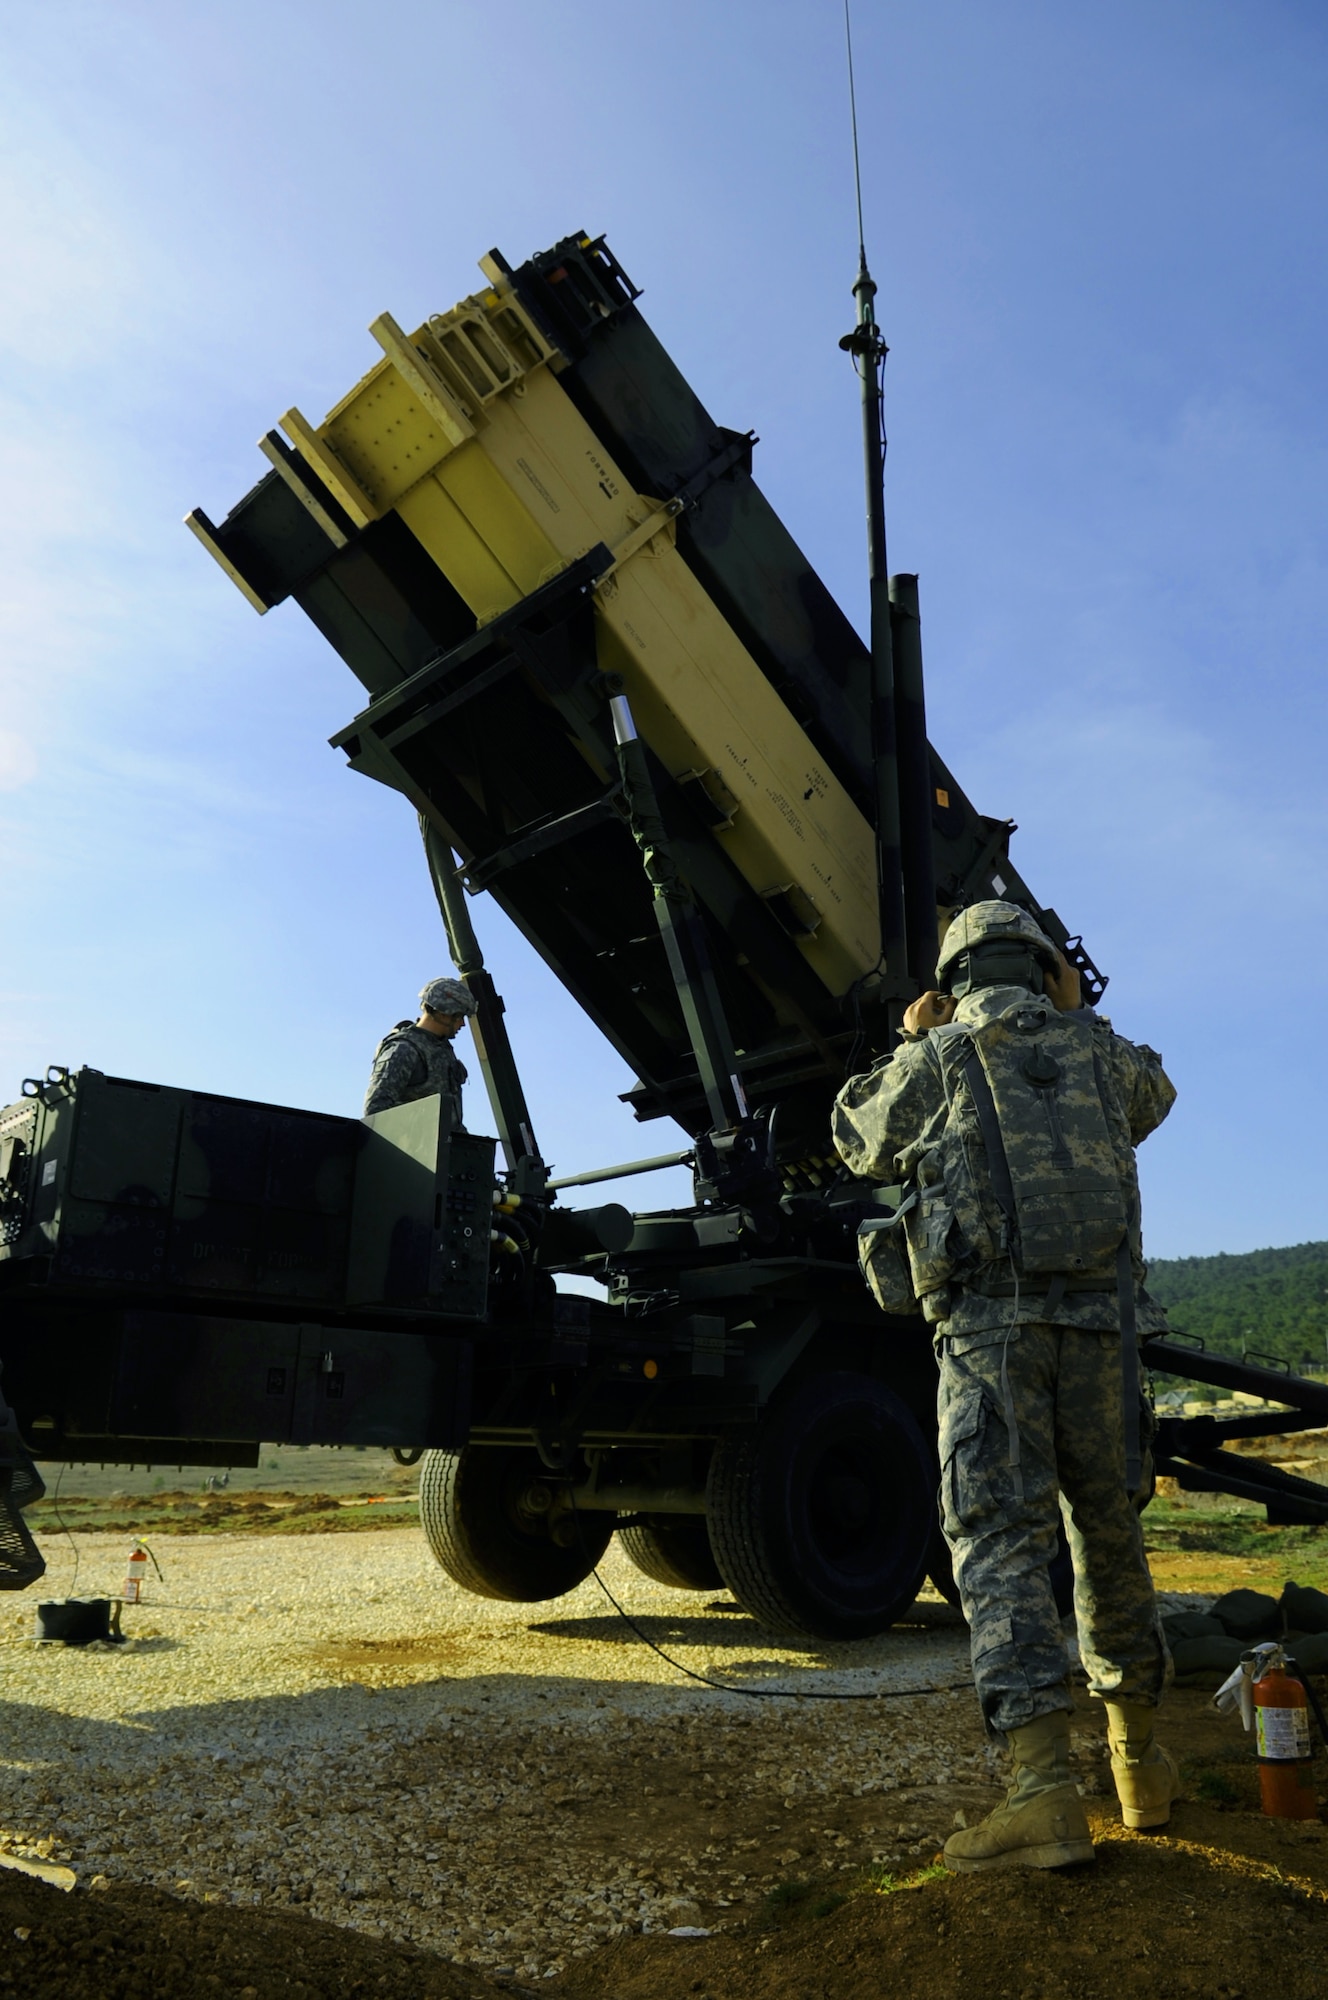 U.S. Army Spc. Marcus Bebe, watches U.S. Army Spc. Charles Chesbro, 3rd Battalion, 2nd Air Defense Artillery maintainers from Fort Sill, Okla., inspect a Patriot launching station Feb. 28, 2103, near Gaziantep, Turkey. Patriot batteries are deployed to Turkey to augment Turkish air defense capabilities. (U.S. Air Force photo by Senior Airman Daniel Phelps/Released)